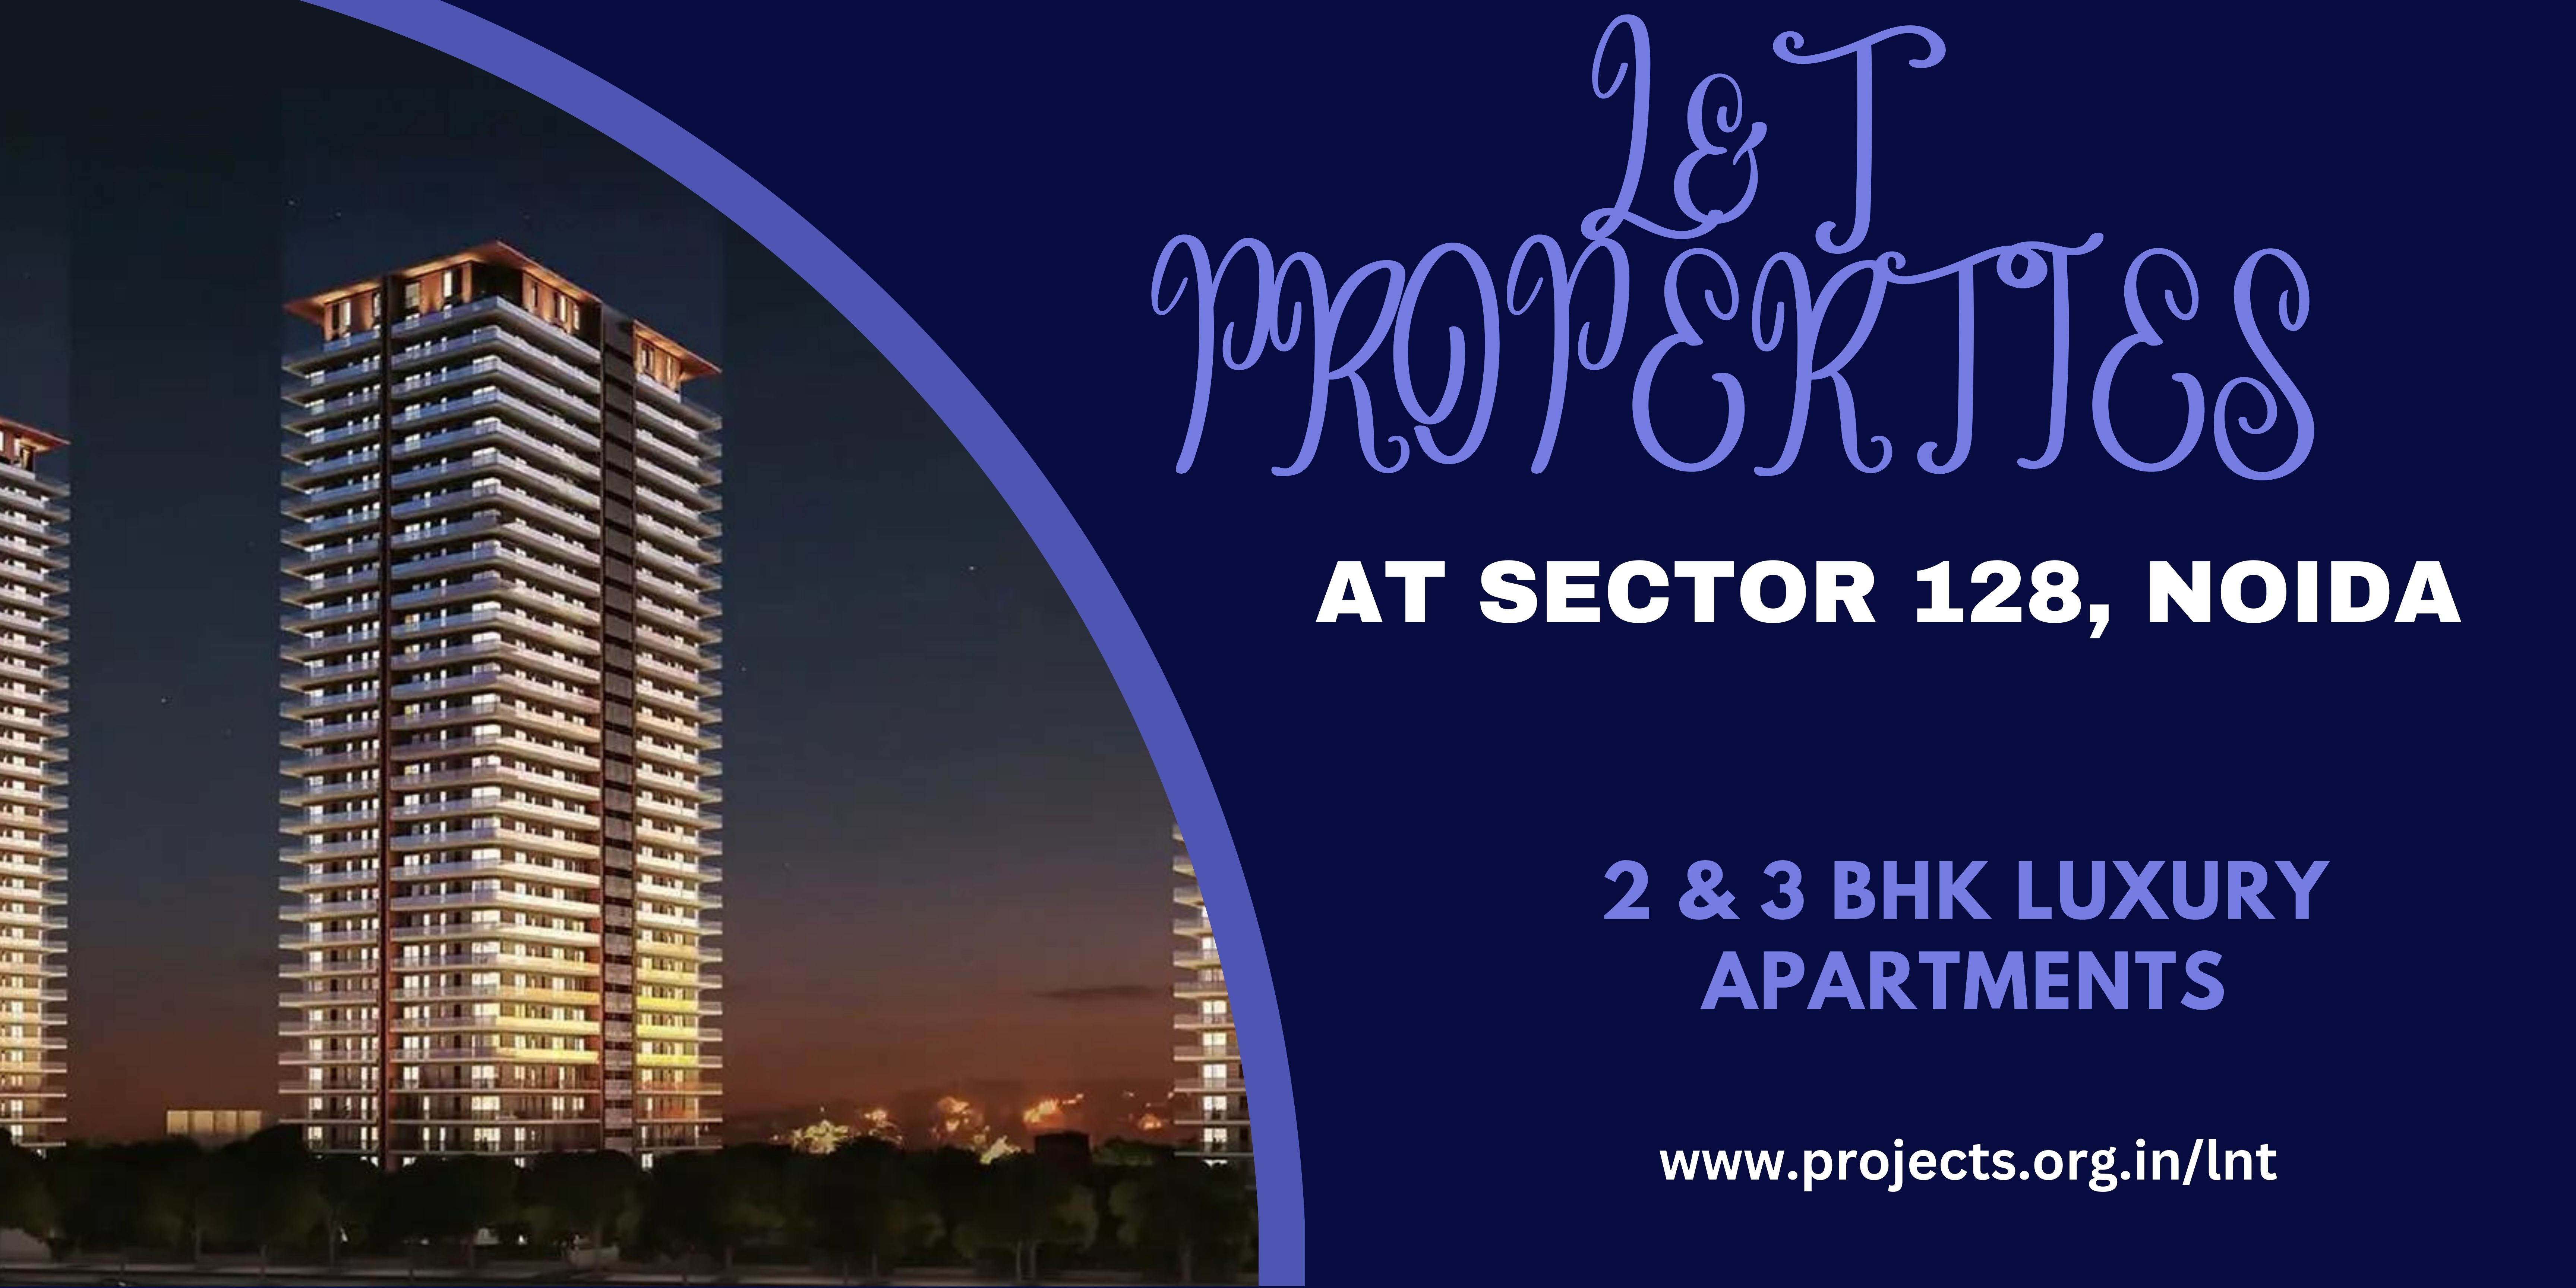 L&T Sector 128 At Sector 128, Noida - Beautiful Apartments In An Excellent Location